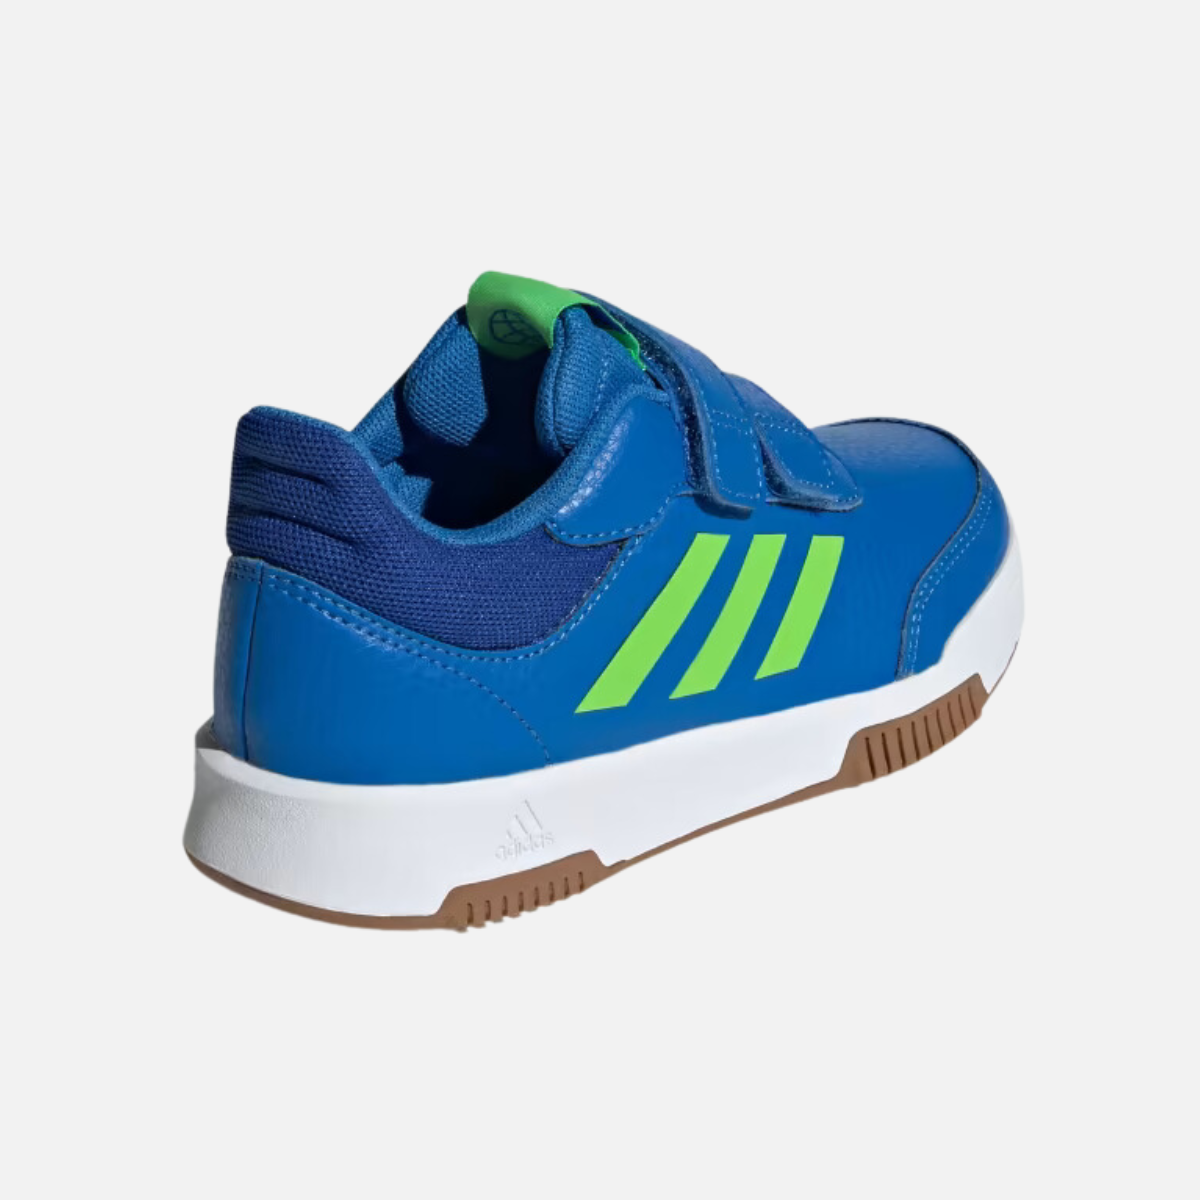 Adidas Tensaur Hook And Loop Kids Unisex Shoes (4-7 YEAR) -Bright Royal/Lucid Lime/Royal Blue